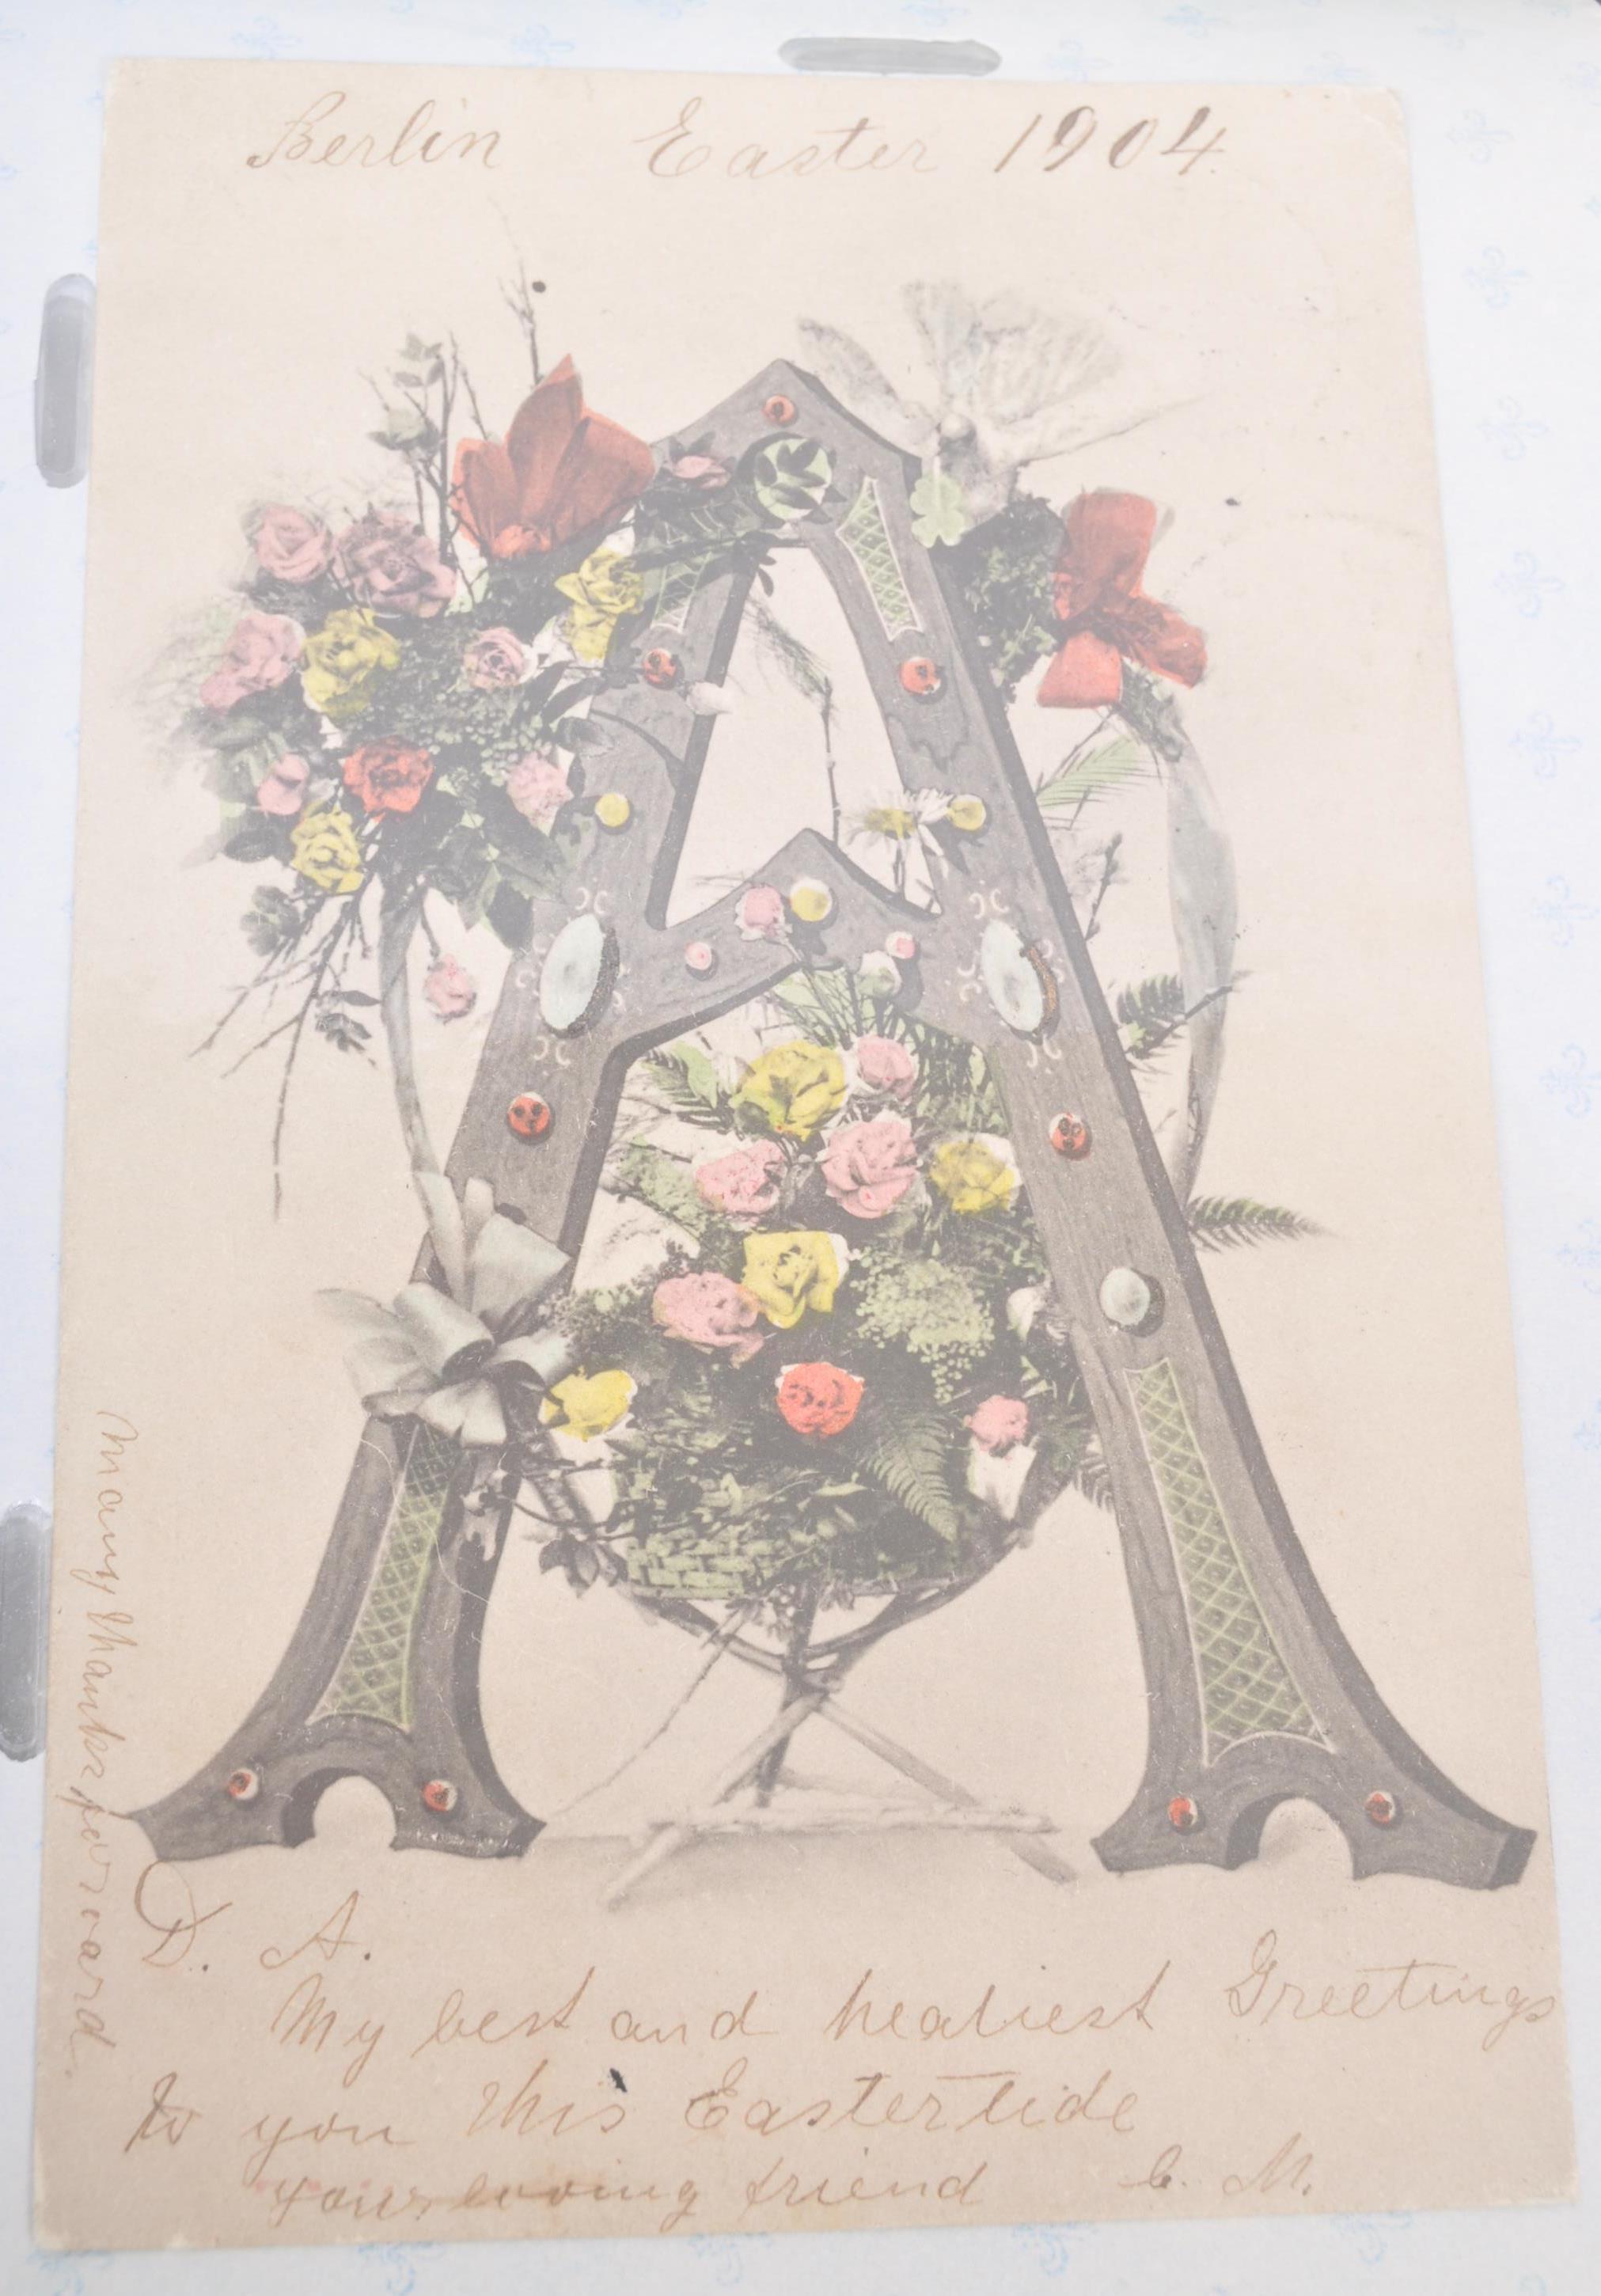 POSTCARDS DEPICTING LARGE LETTERS ALPHABET CHARACTERS - Image 6 of 6